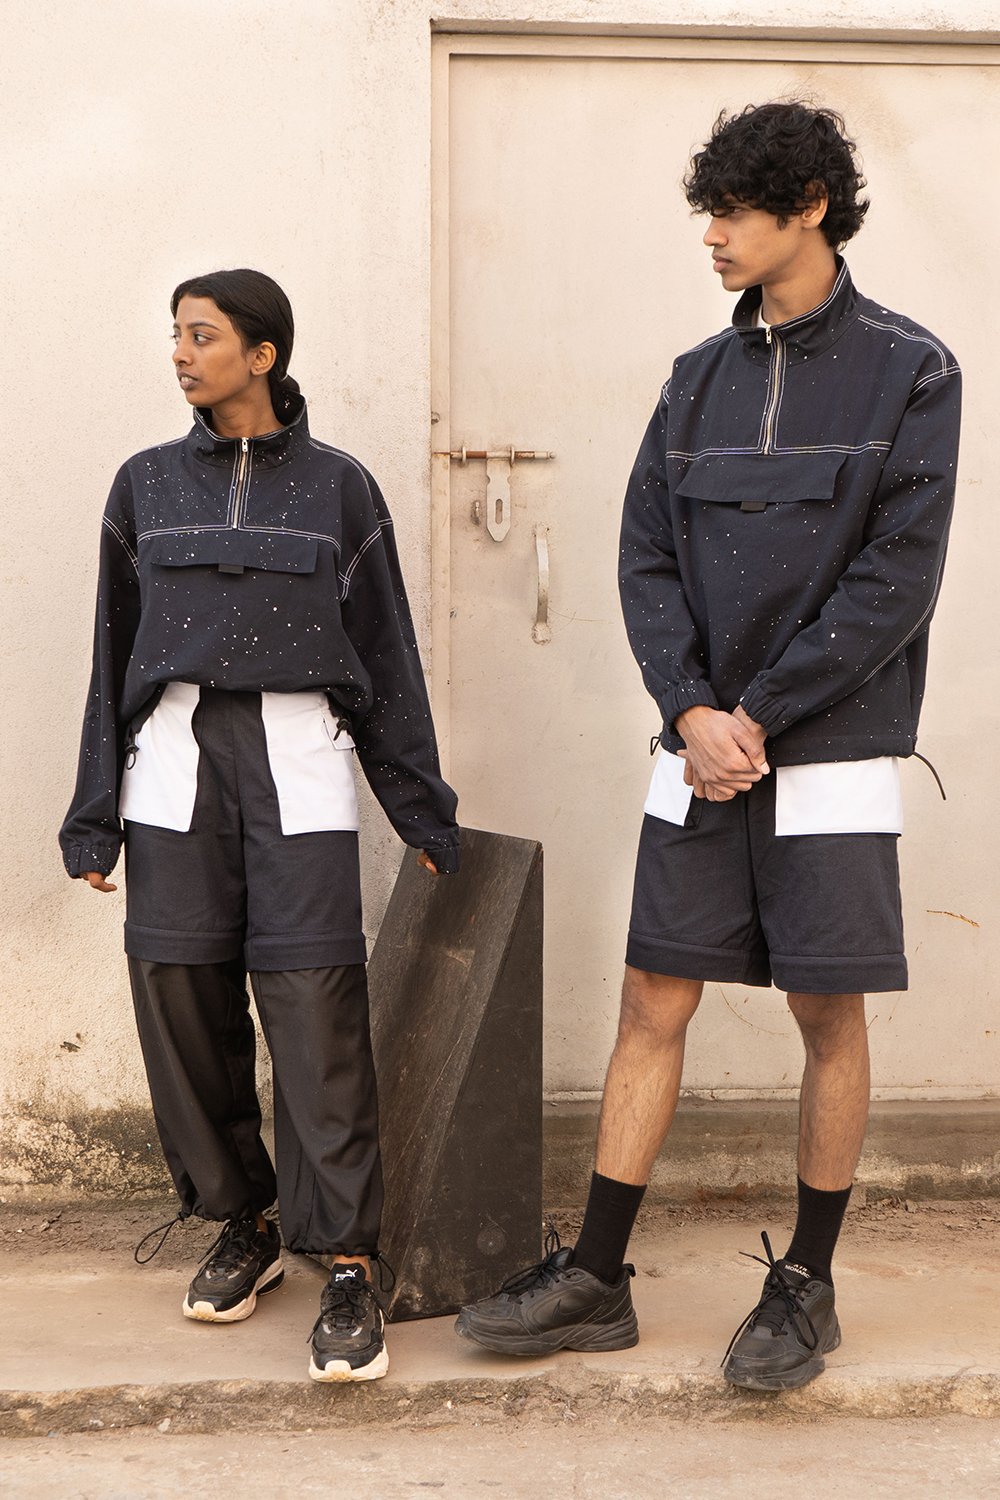 Black and Blue Convertible Pants and Shorts. Hand Made. 100% Cotton. Featured in Vogue Magazine.Designed in Madras, Made in India  | BISKIT UNISEX CLOTHING LABEL